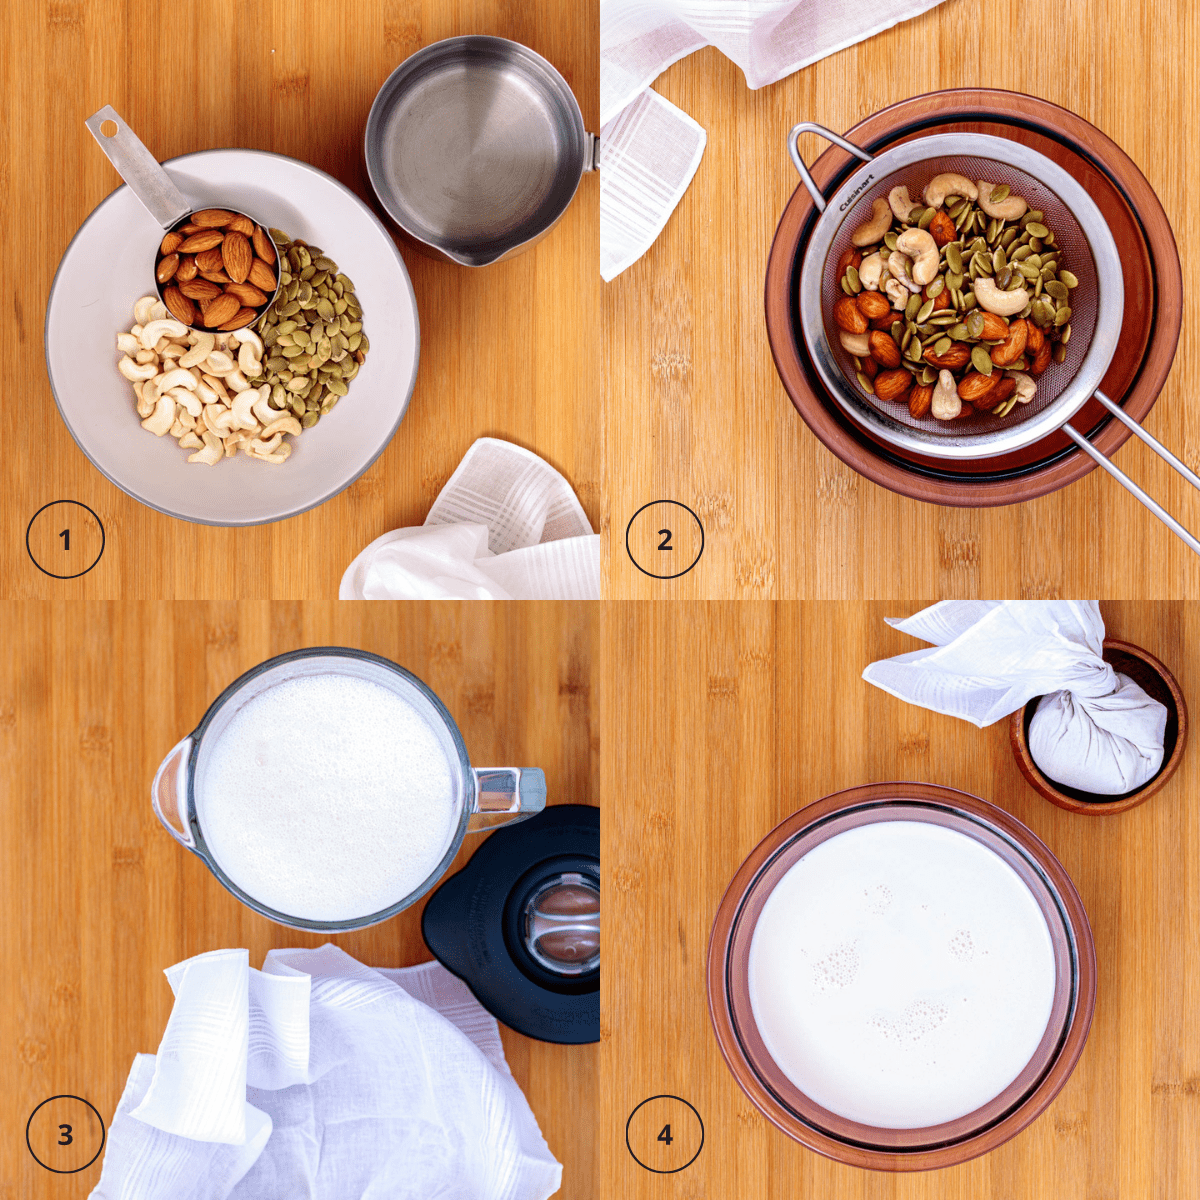 Soak nuts and seeds, blend and strain for rich, homemade nut milk.